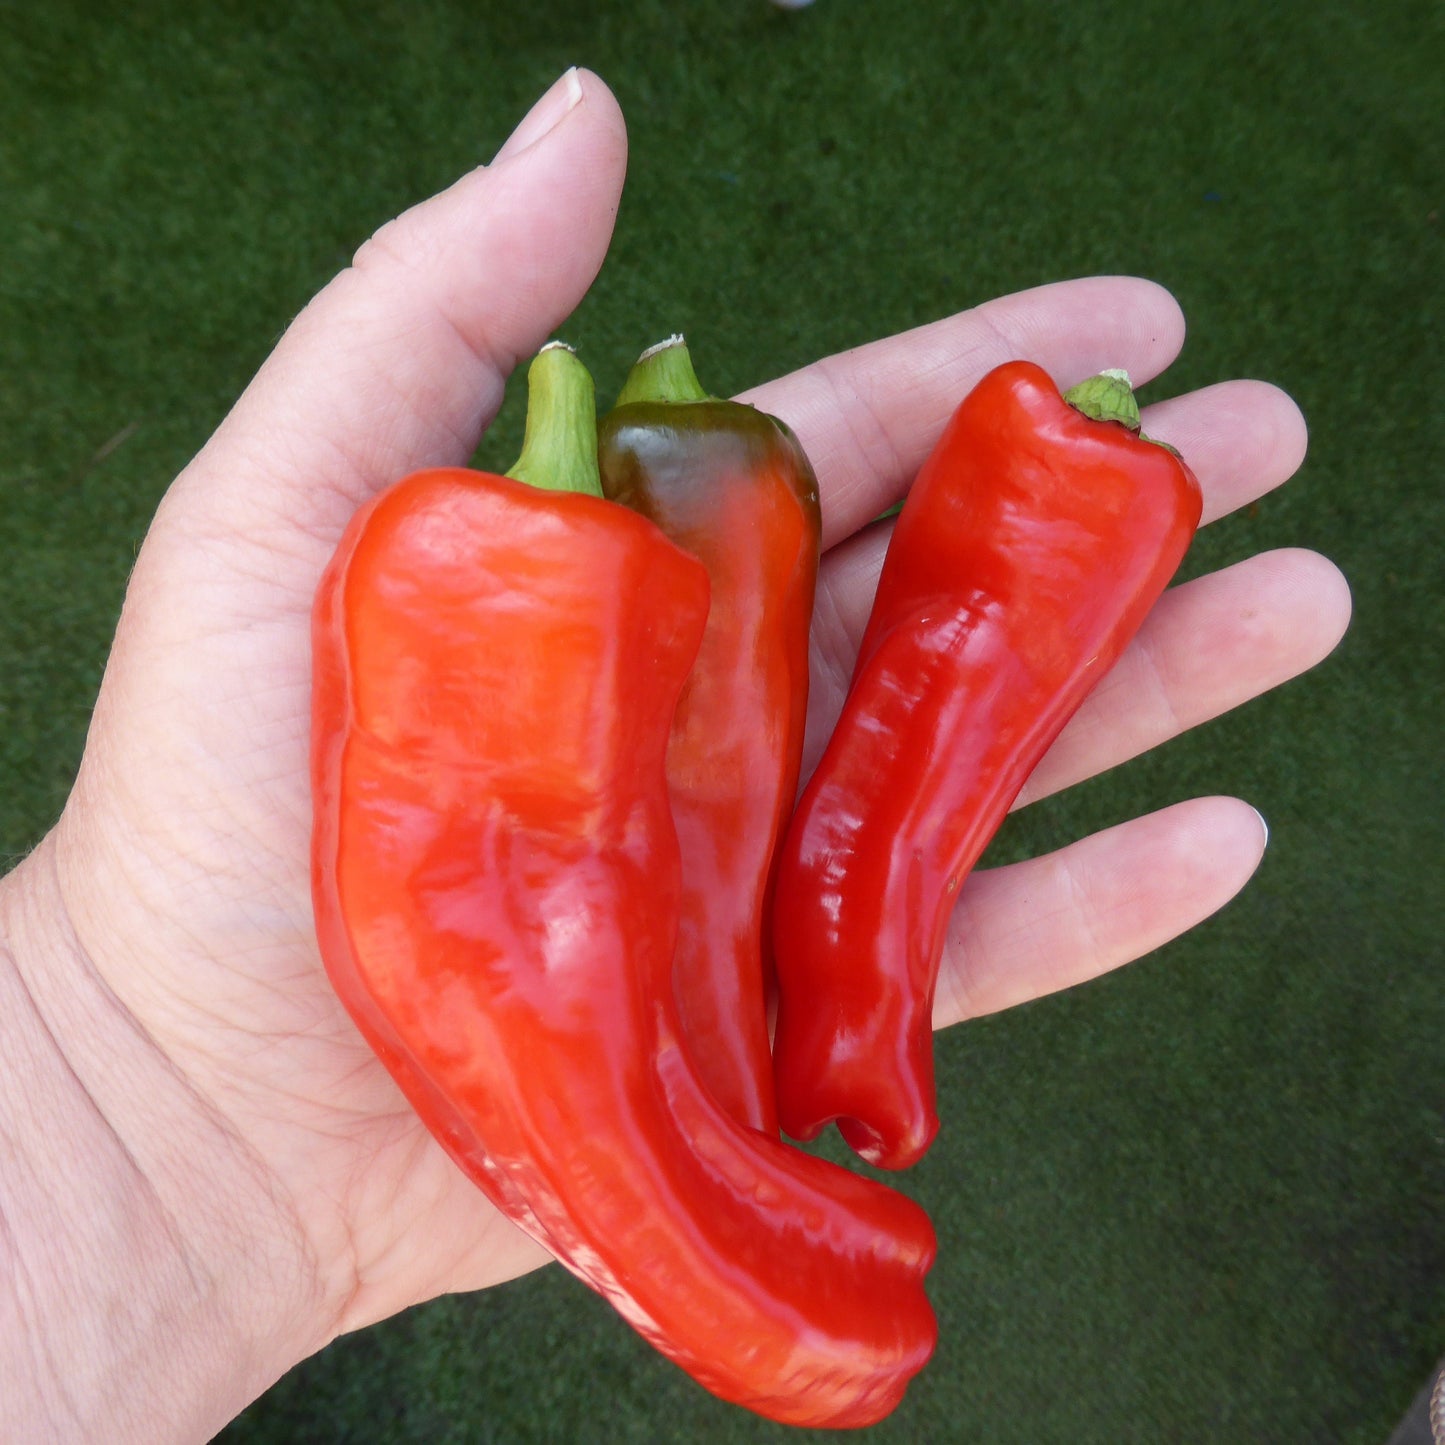 25 Organic GIANT SZEGEDI PEPPER Capsicum Annuum Hungarian Sweet Paprika / Tapered Bell White Yellow Orange Red Seeds